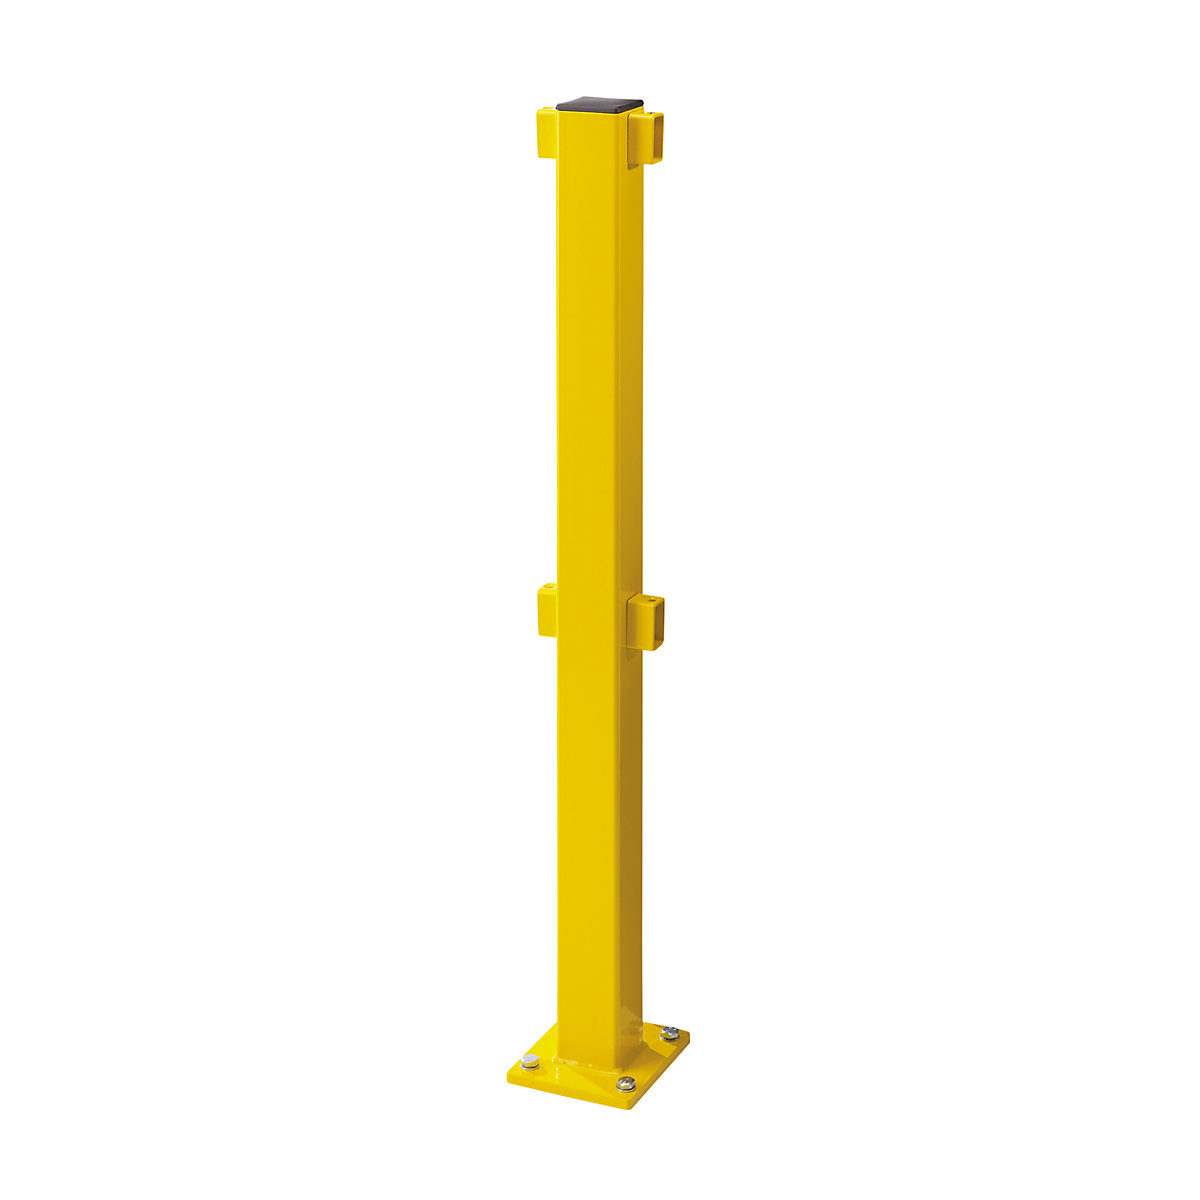 S-Line post for safety railing, for outdoor areas, centre post-2